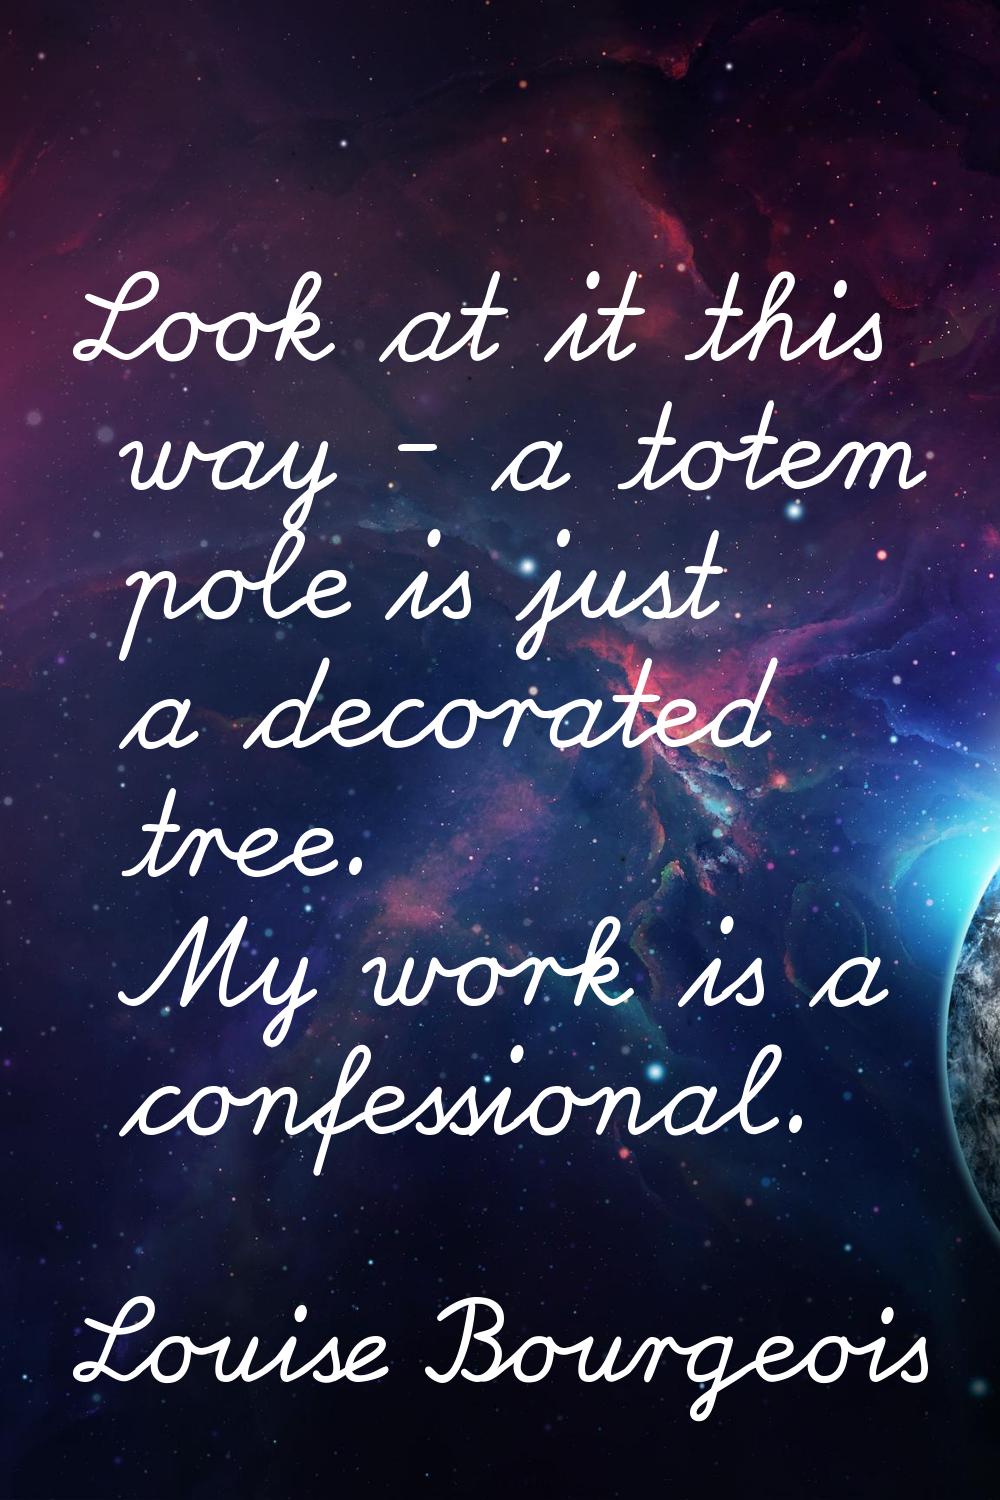 Look at it this way - a totem pole is just a decorated tree. My work is a confessional.